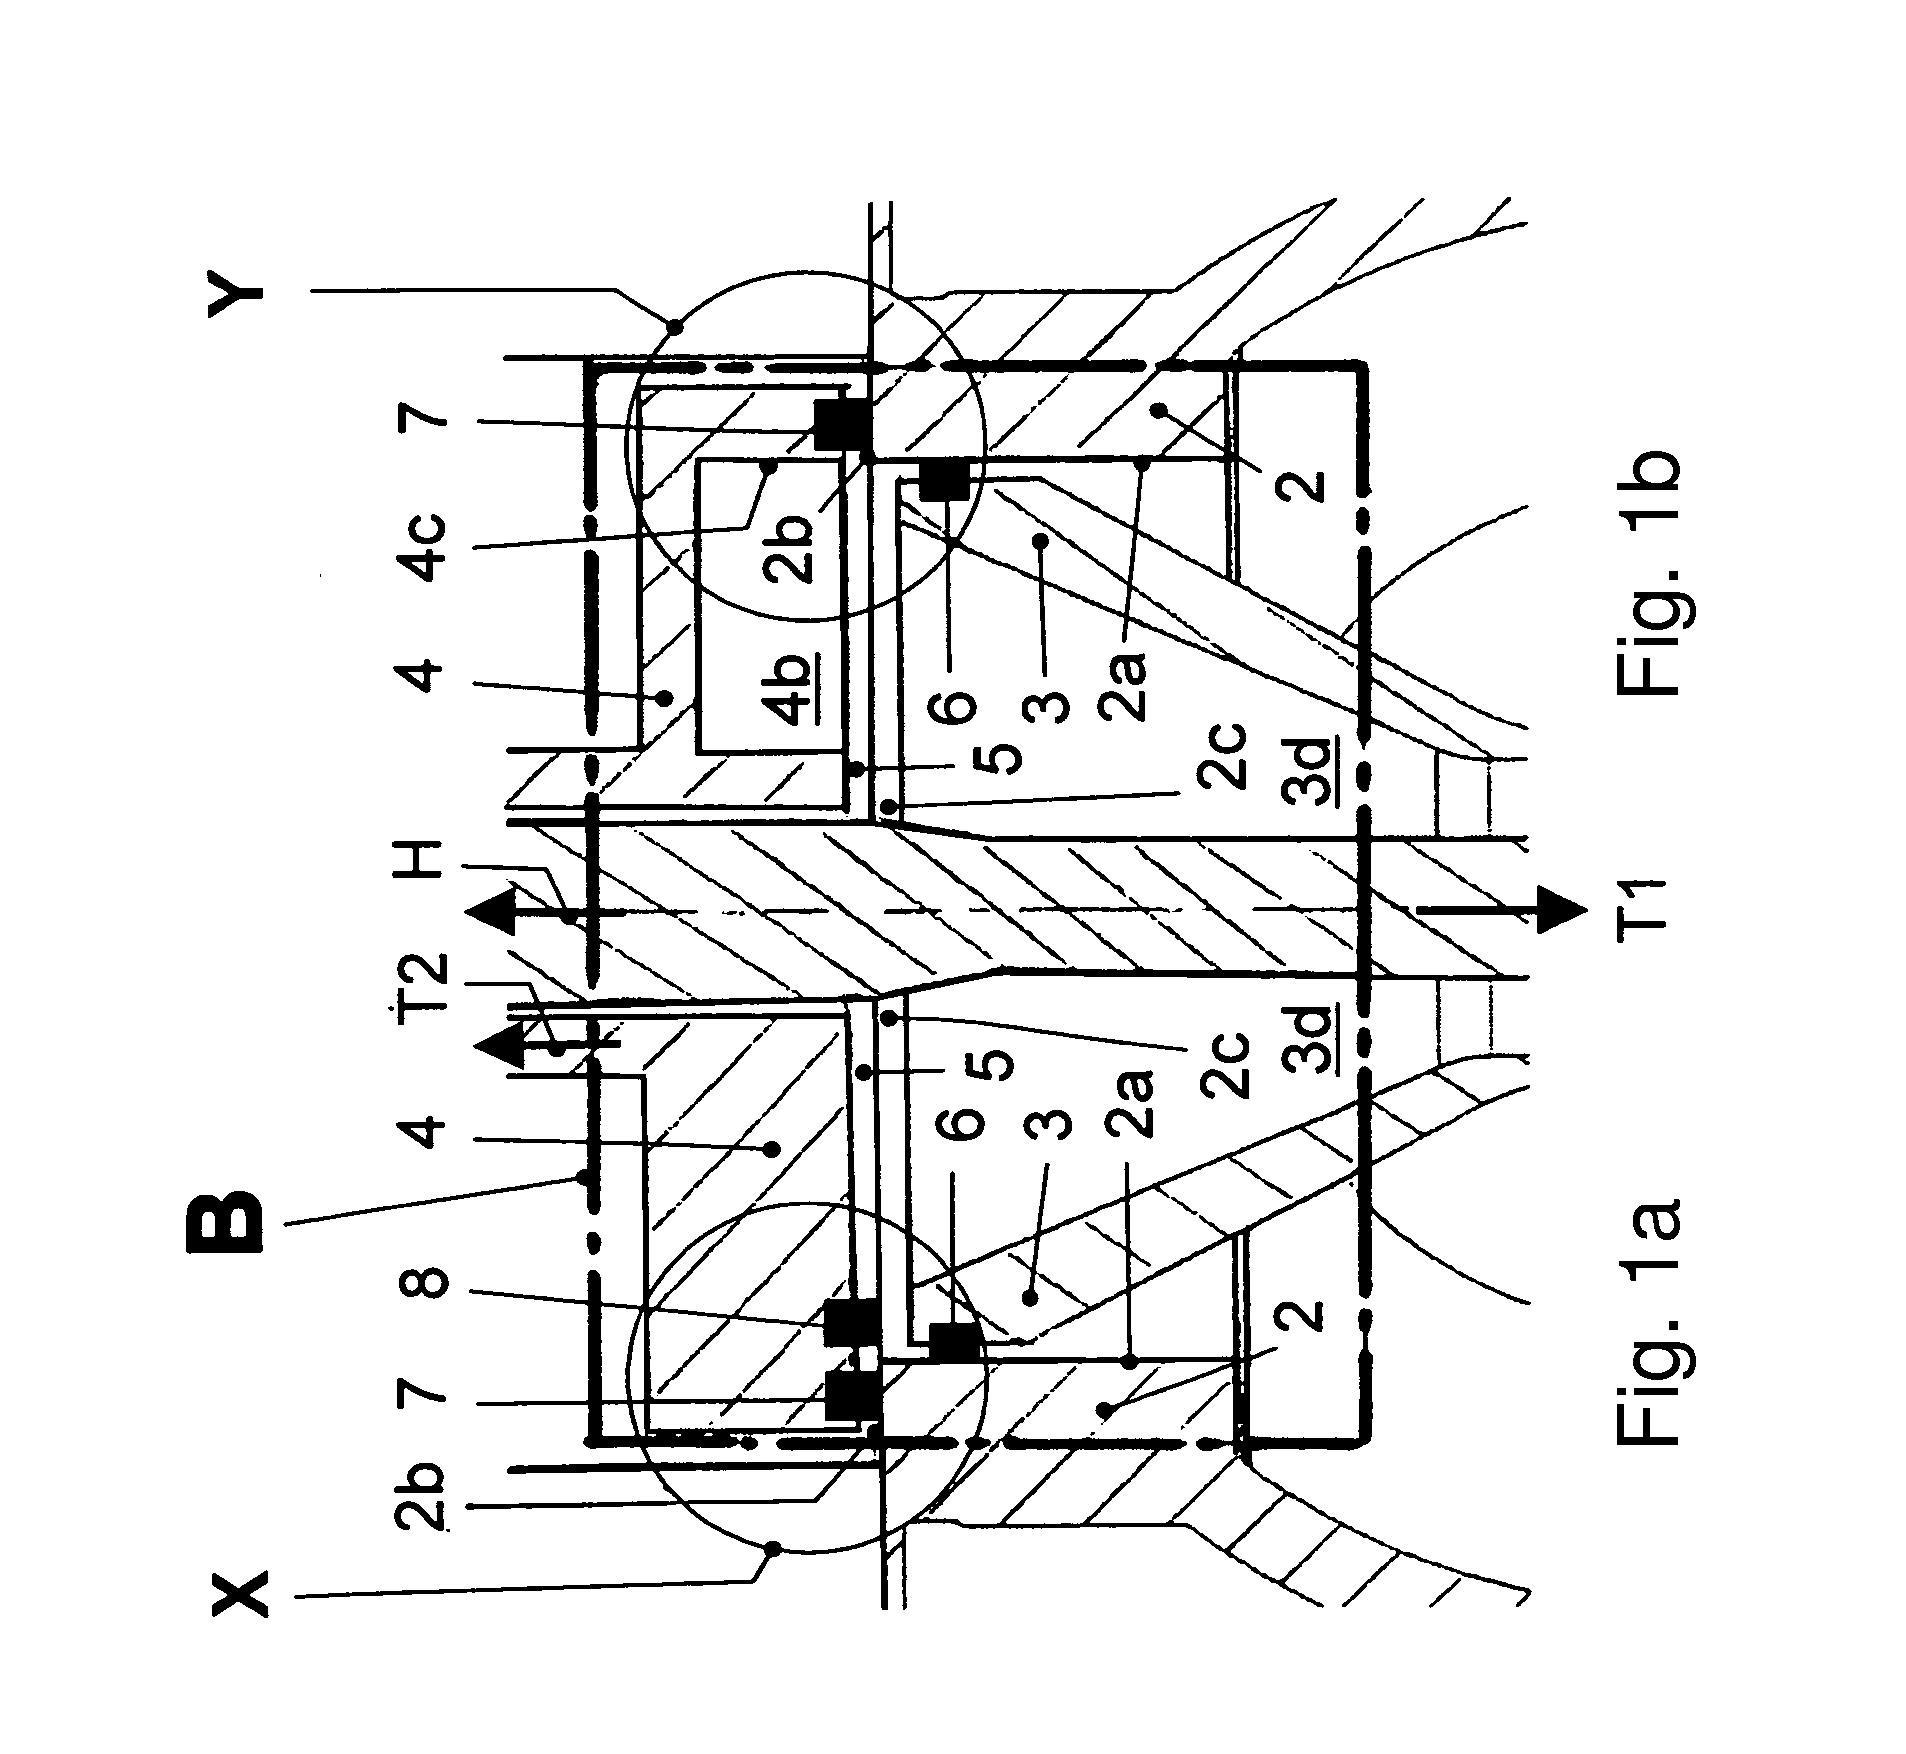 Double-seat valve with a seat-cleaning function